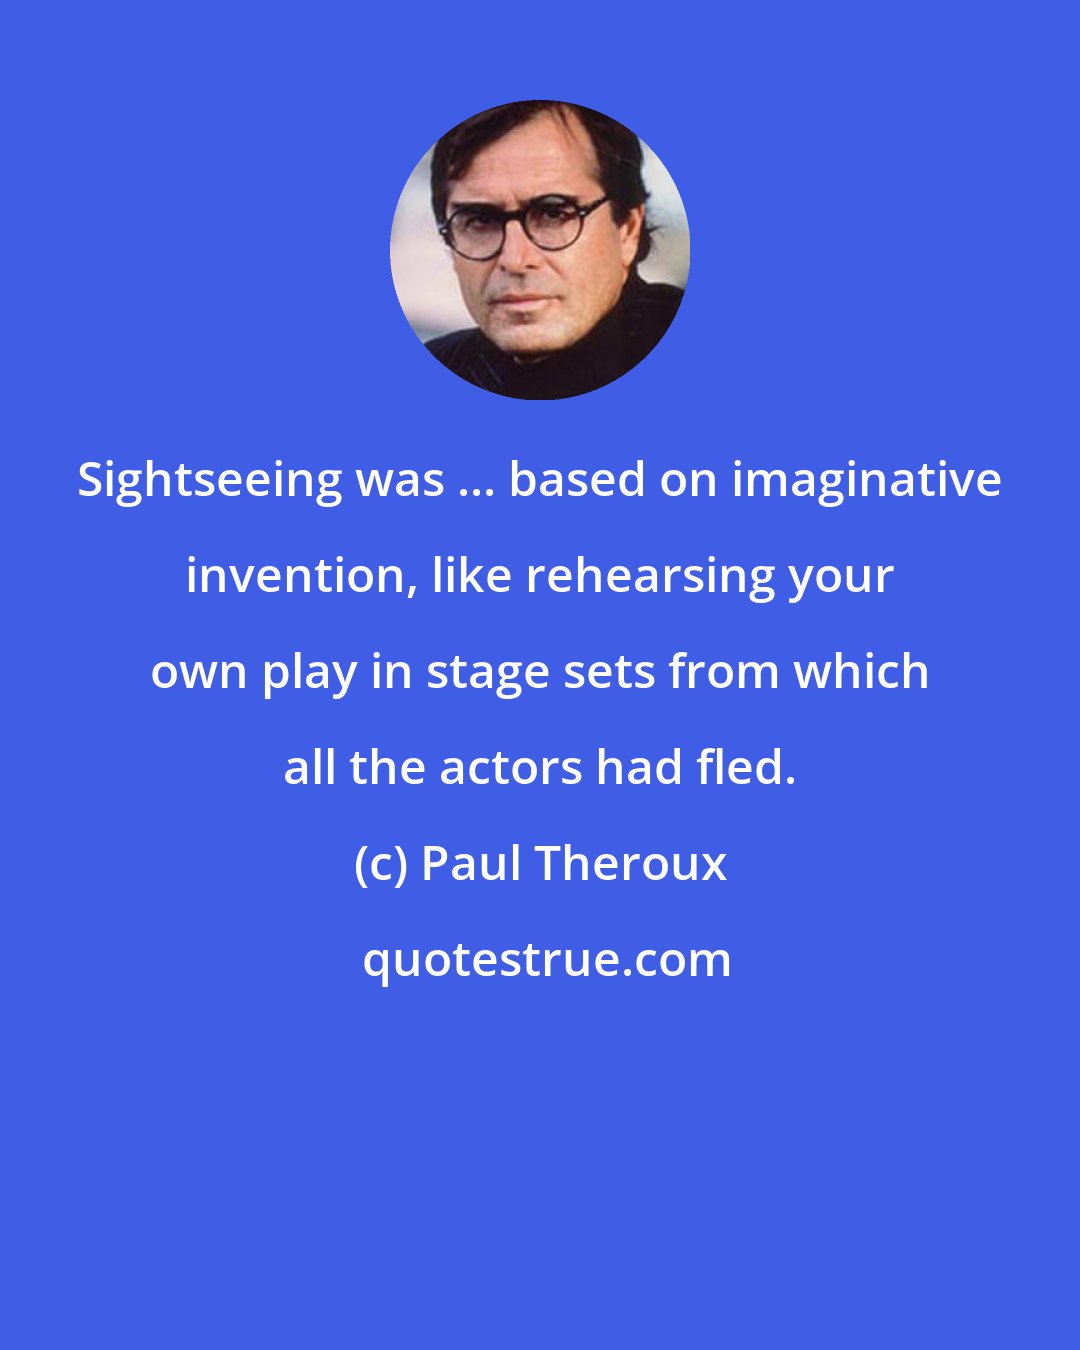 Paul Theroux: Sightseeing was ... based on imaginative invention, like rehearsing your own play in stage sets from which all the actors had fled.